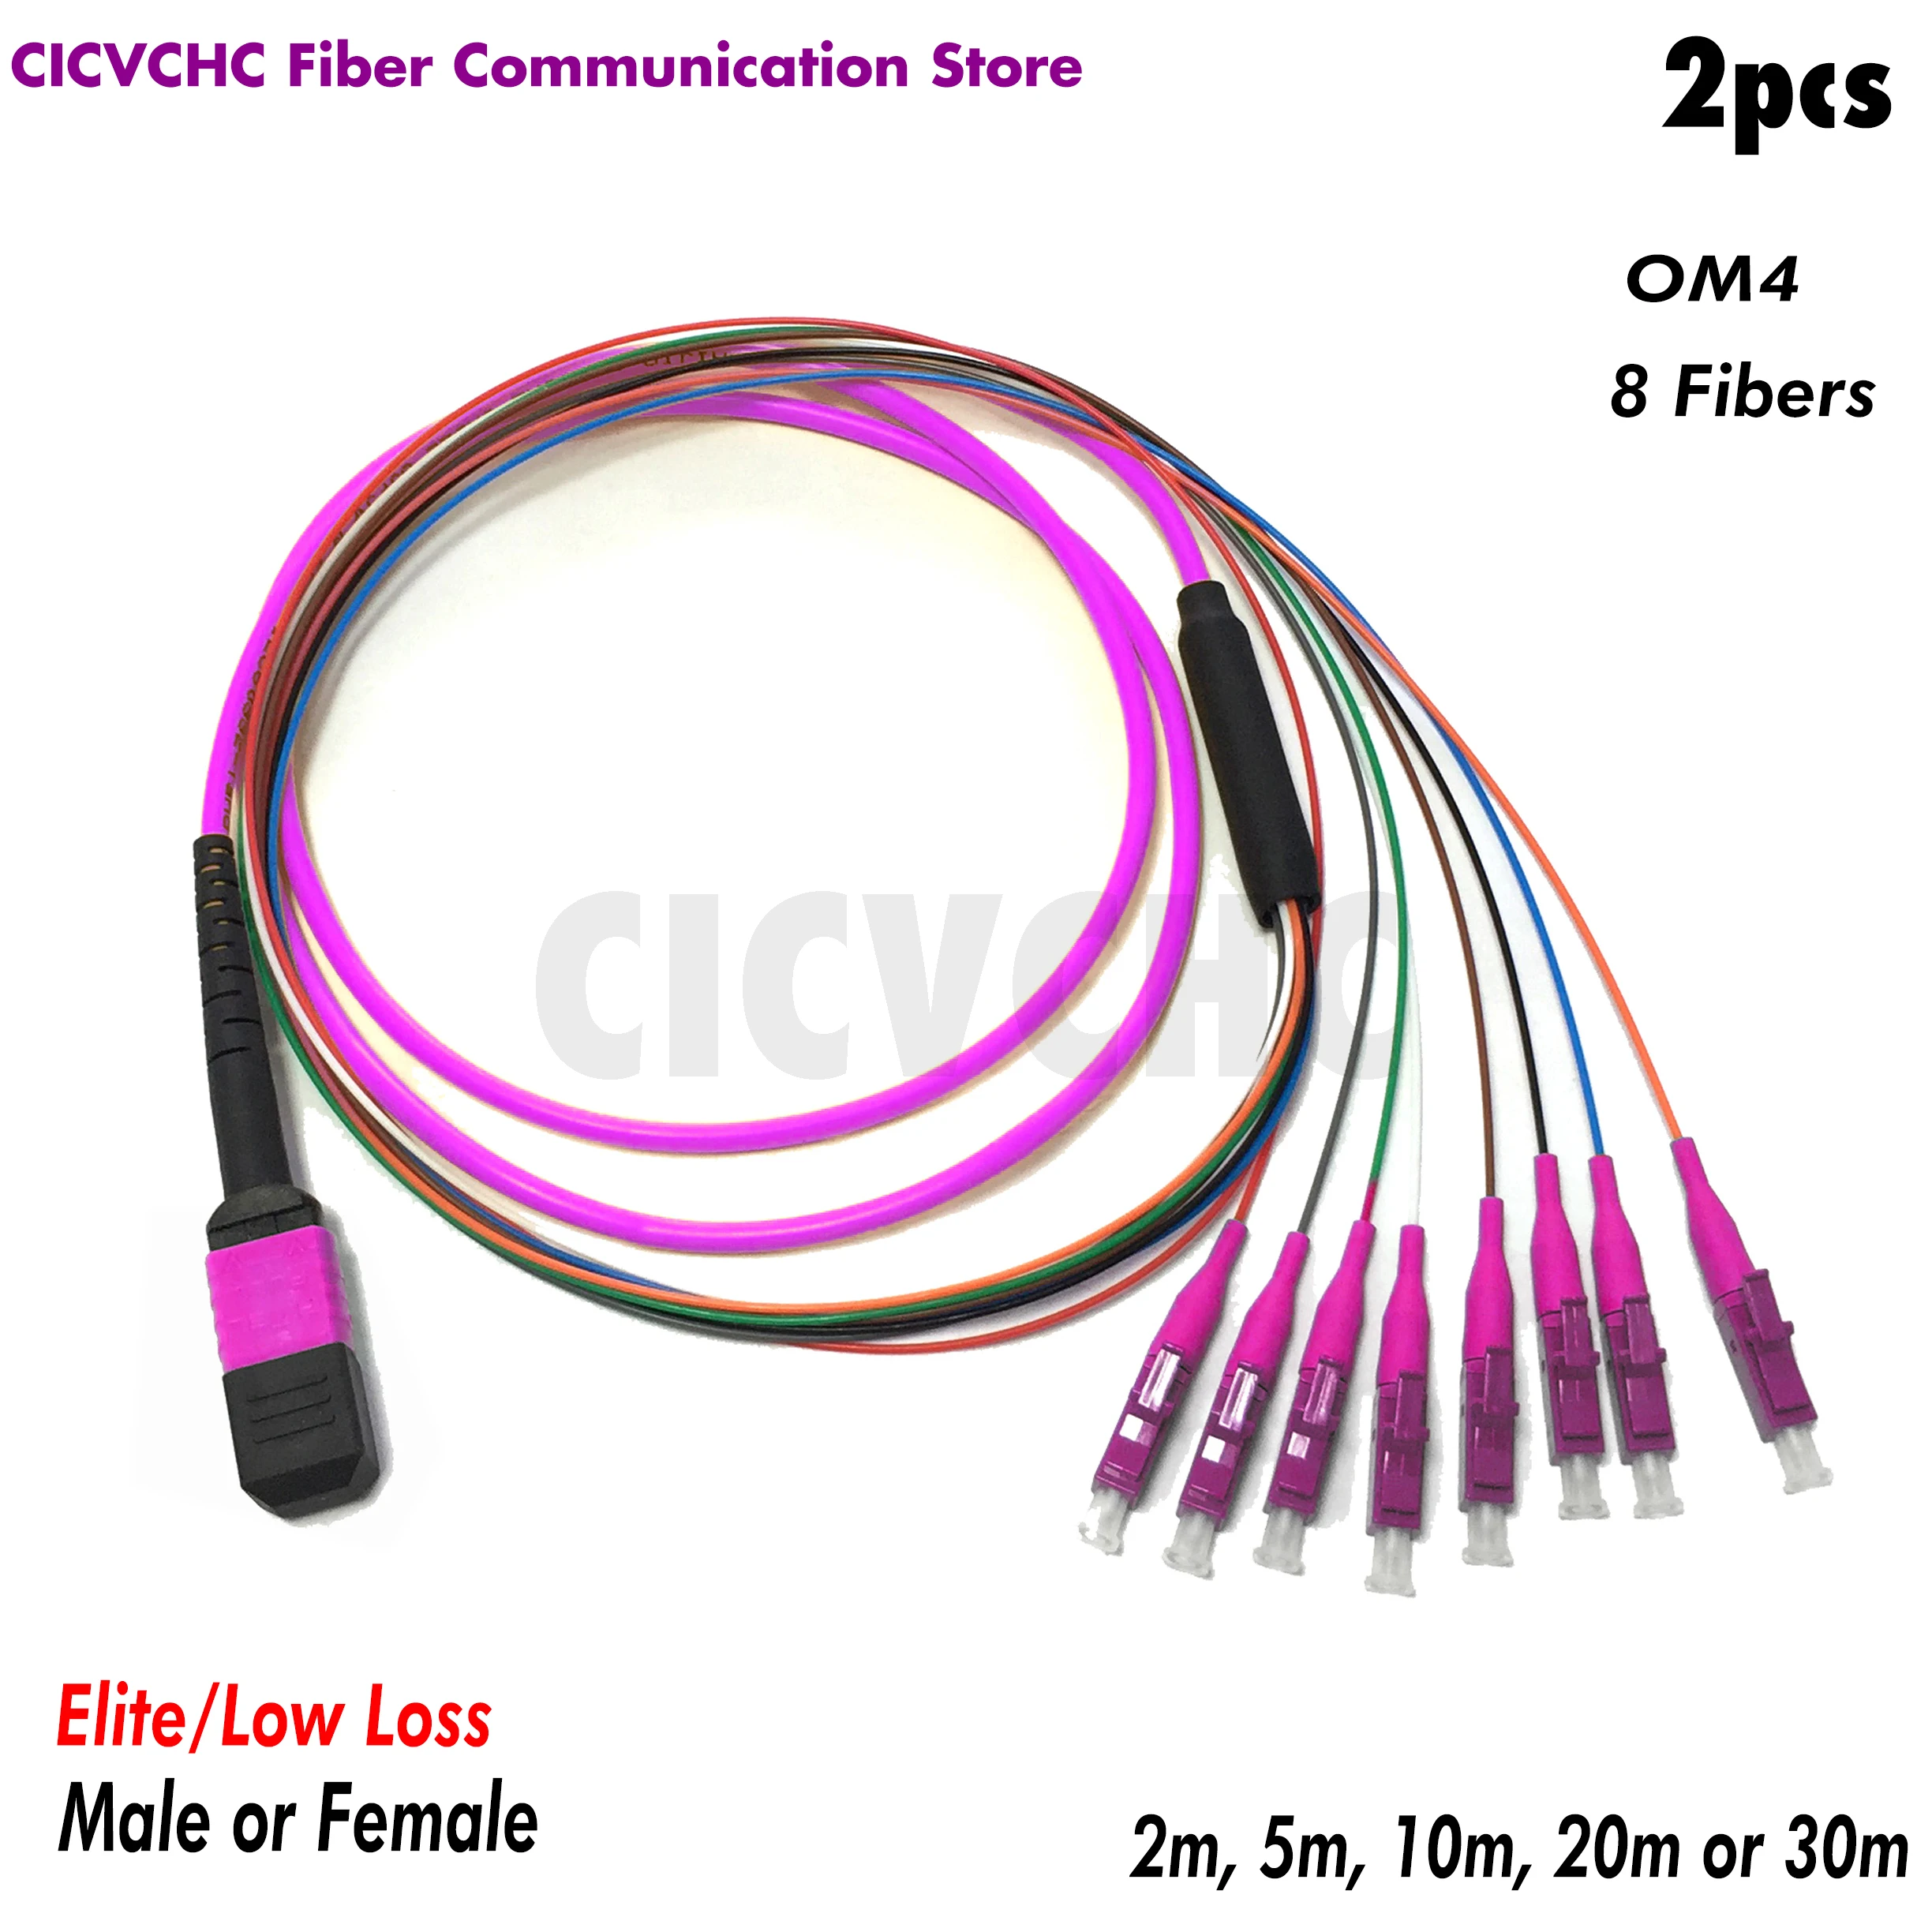 2pcs 8 fibers-MPO/UPC Fanout LC/UPC -OM4-Elite/Low loss-Male/Female with 0.9mm-2m to 30m/MPO Assembly n type female bulkhead male plug switch ufl ipx rf cable assembly for pci wifi card wireless router fast shipping